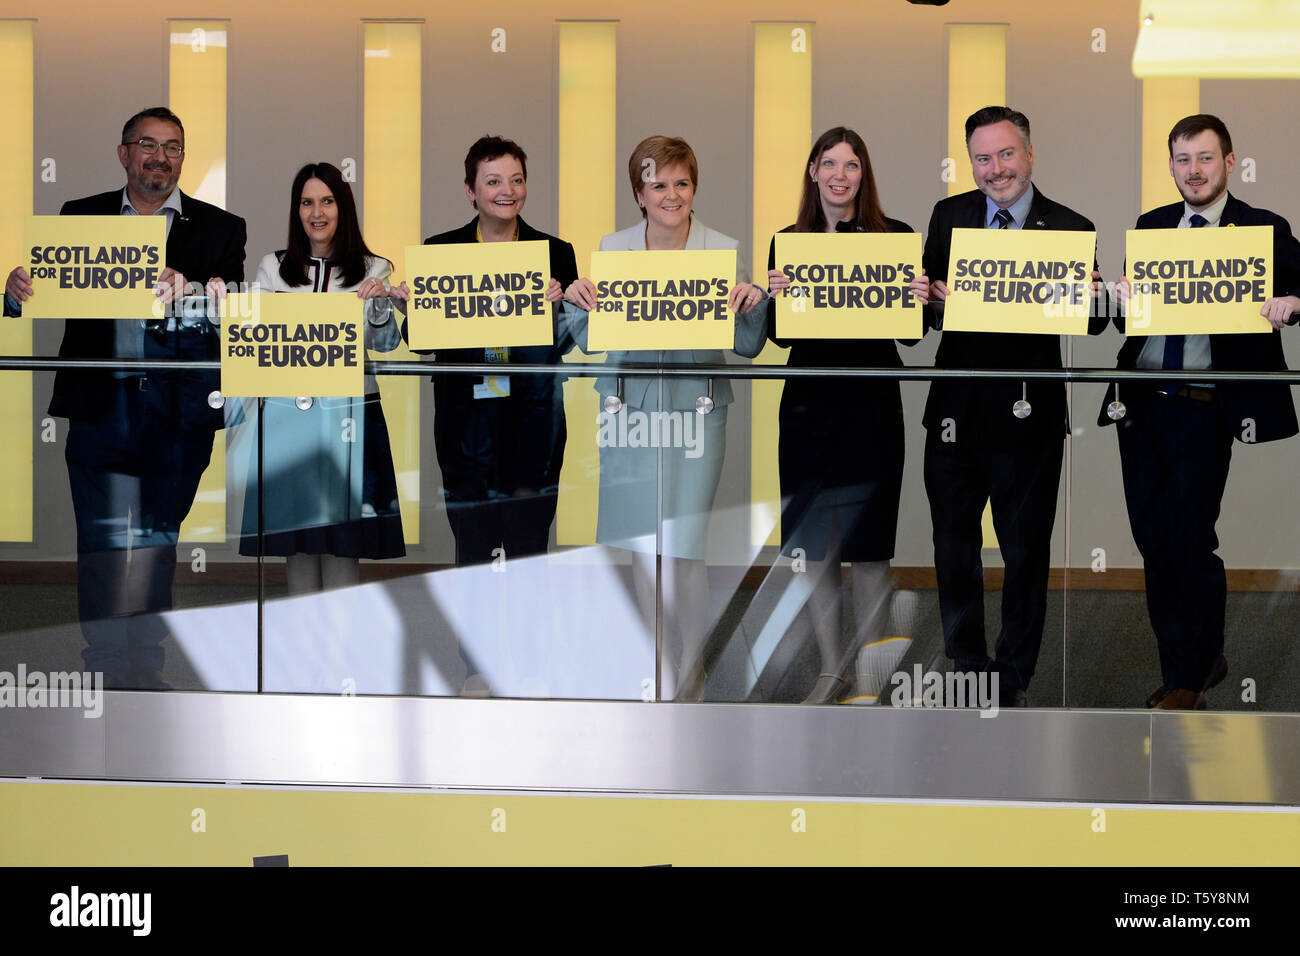 Edinburgh, Scotland, United Kingdom, 27, April, 2019. First Minister Nicola Sturgeon (C) poses with the SNP candidates for the European elections, including sitting MEP Alyn Smith (2nd R), at the Scottish National Party's Spring Conference in the Edinburgh International Conference Centre. © Ken Jack / Alamy Live News Stock Photo